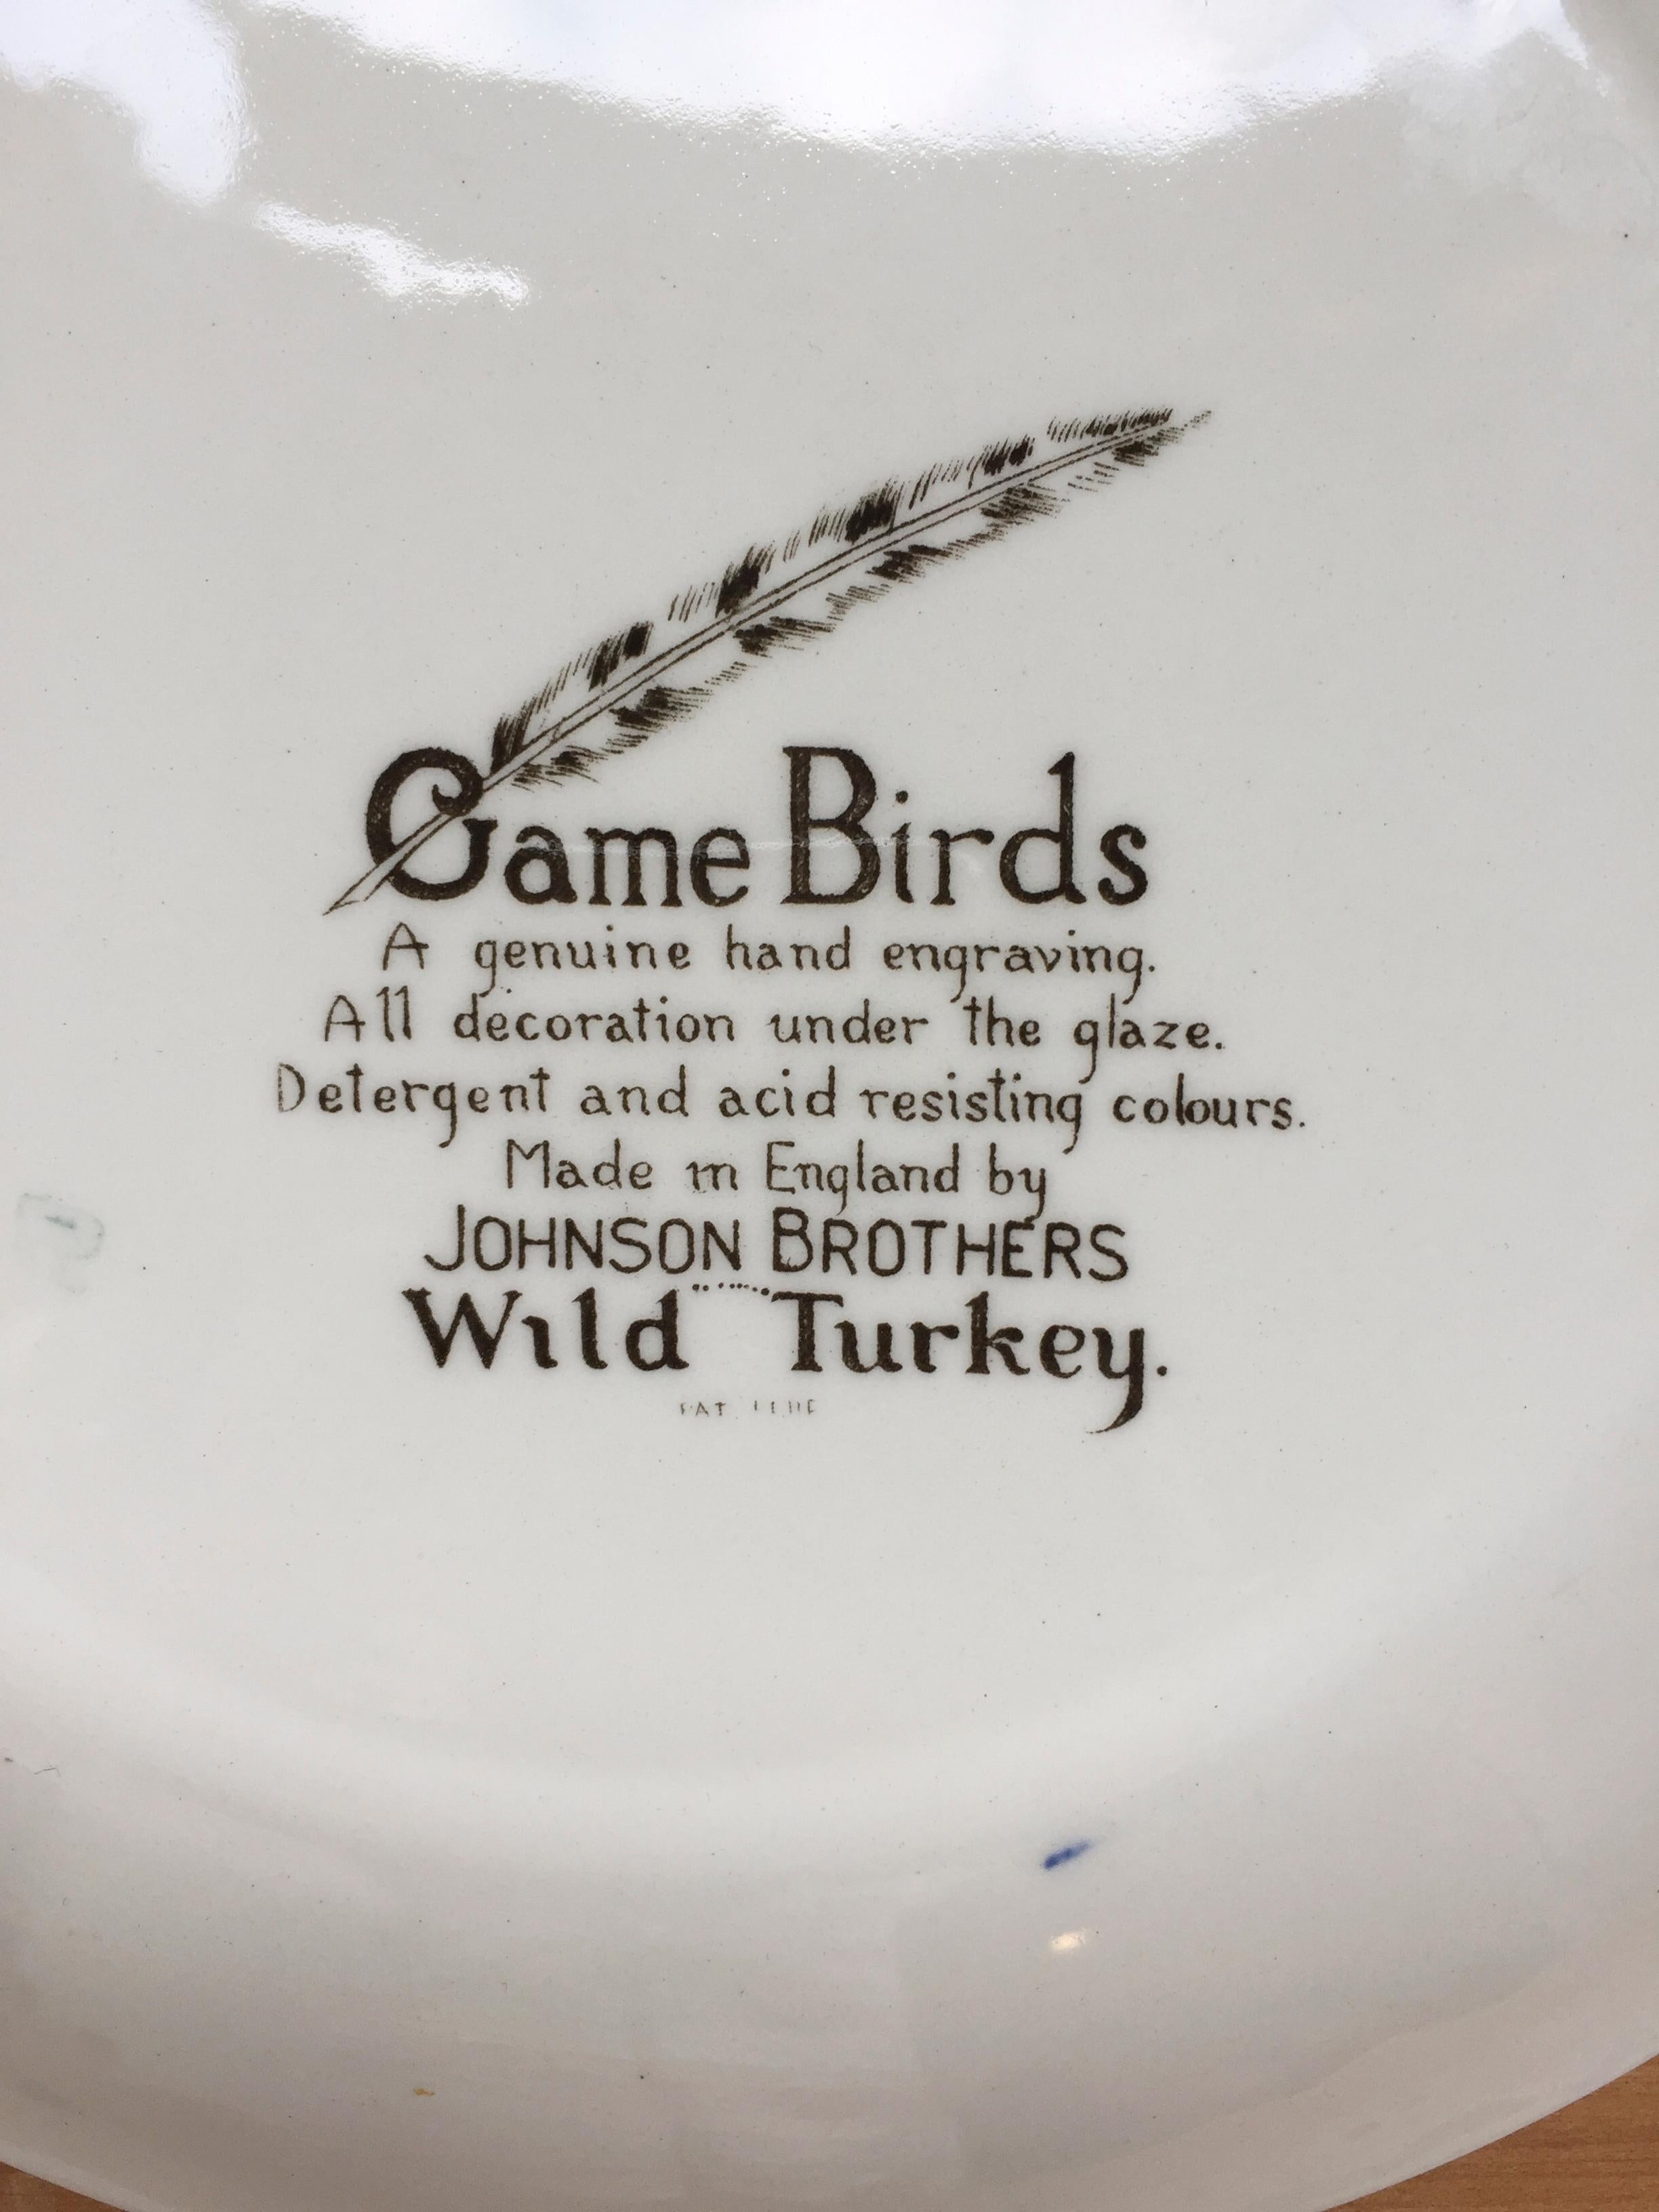 Fantastic oval porcelain English plate, wild turkey painted by hand.
From the early 1960s
Johnson Brothers has been producing beautiful tableware since 1883. 
The Game Birds were produced from 1953-1976, and the plate that we are offering must be